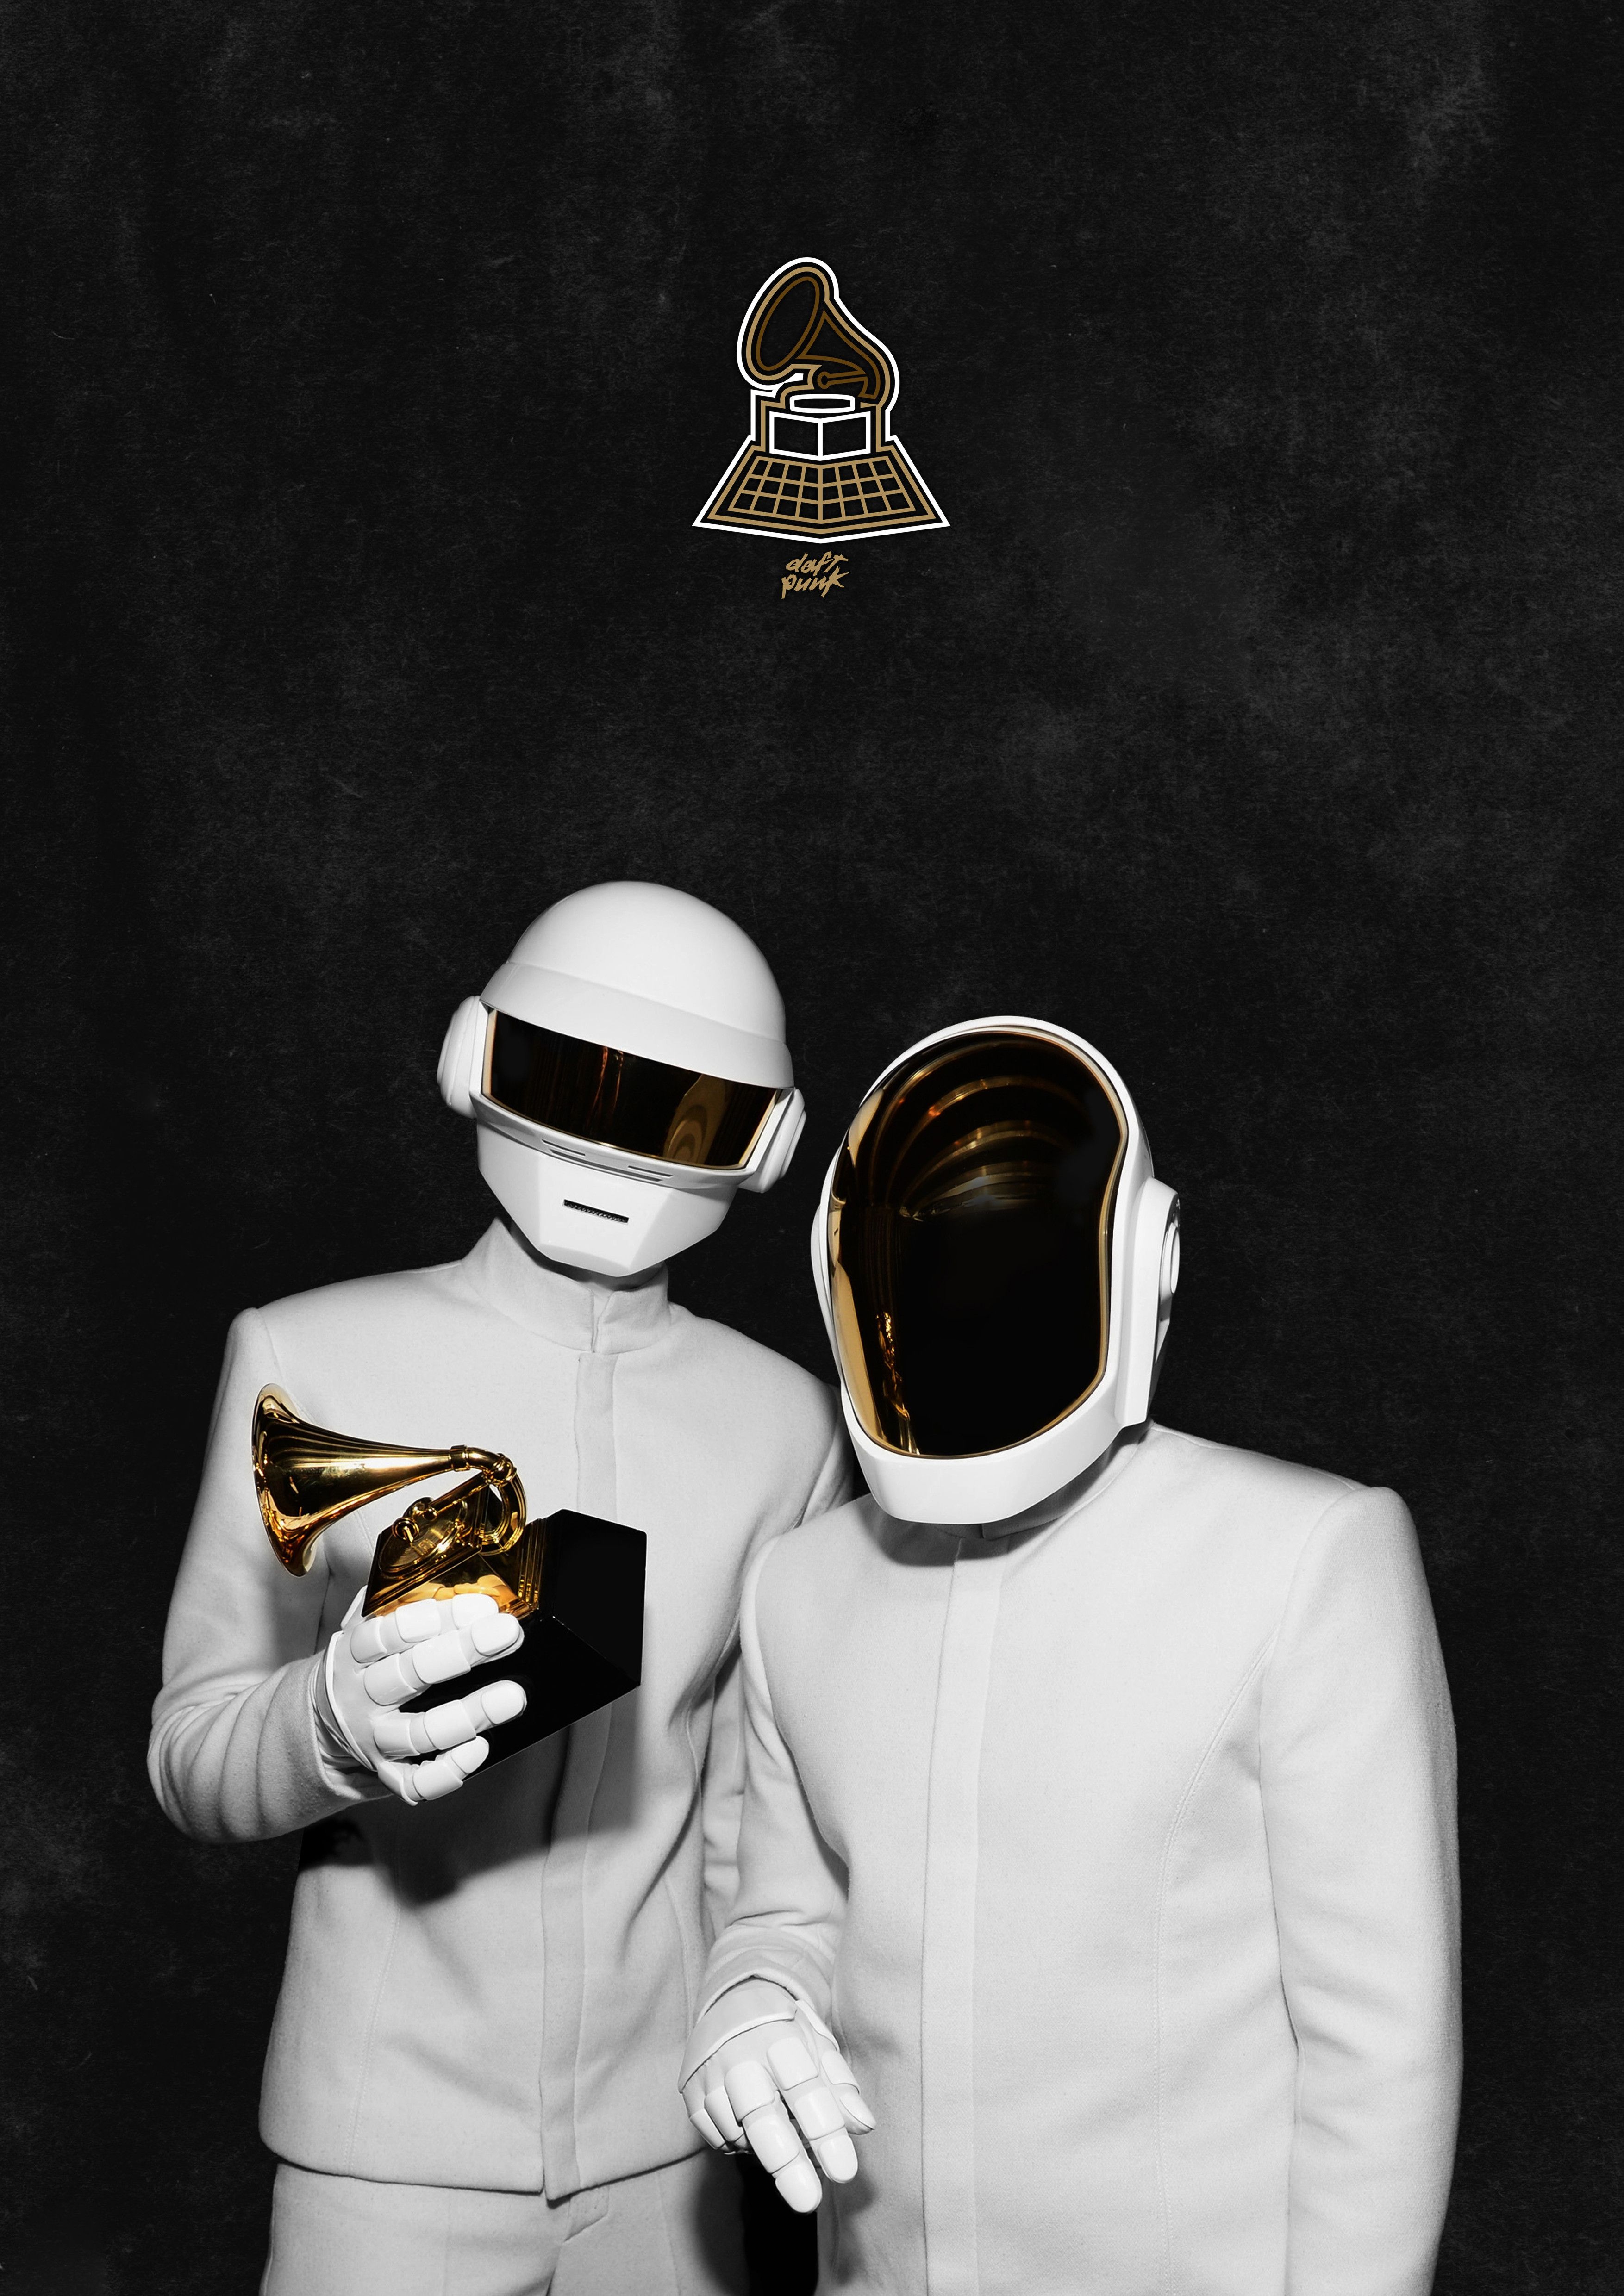 Daft Punk At The Grammys (Poster Wallpaper IPhone5)